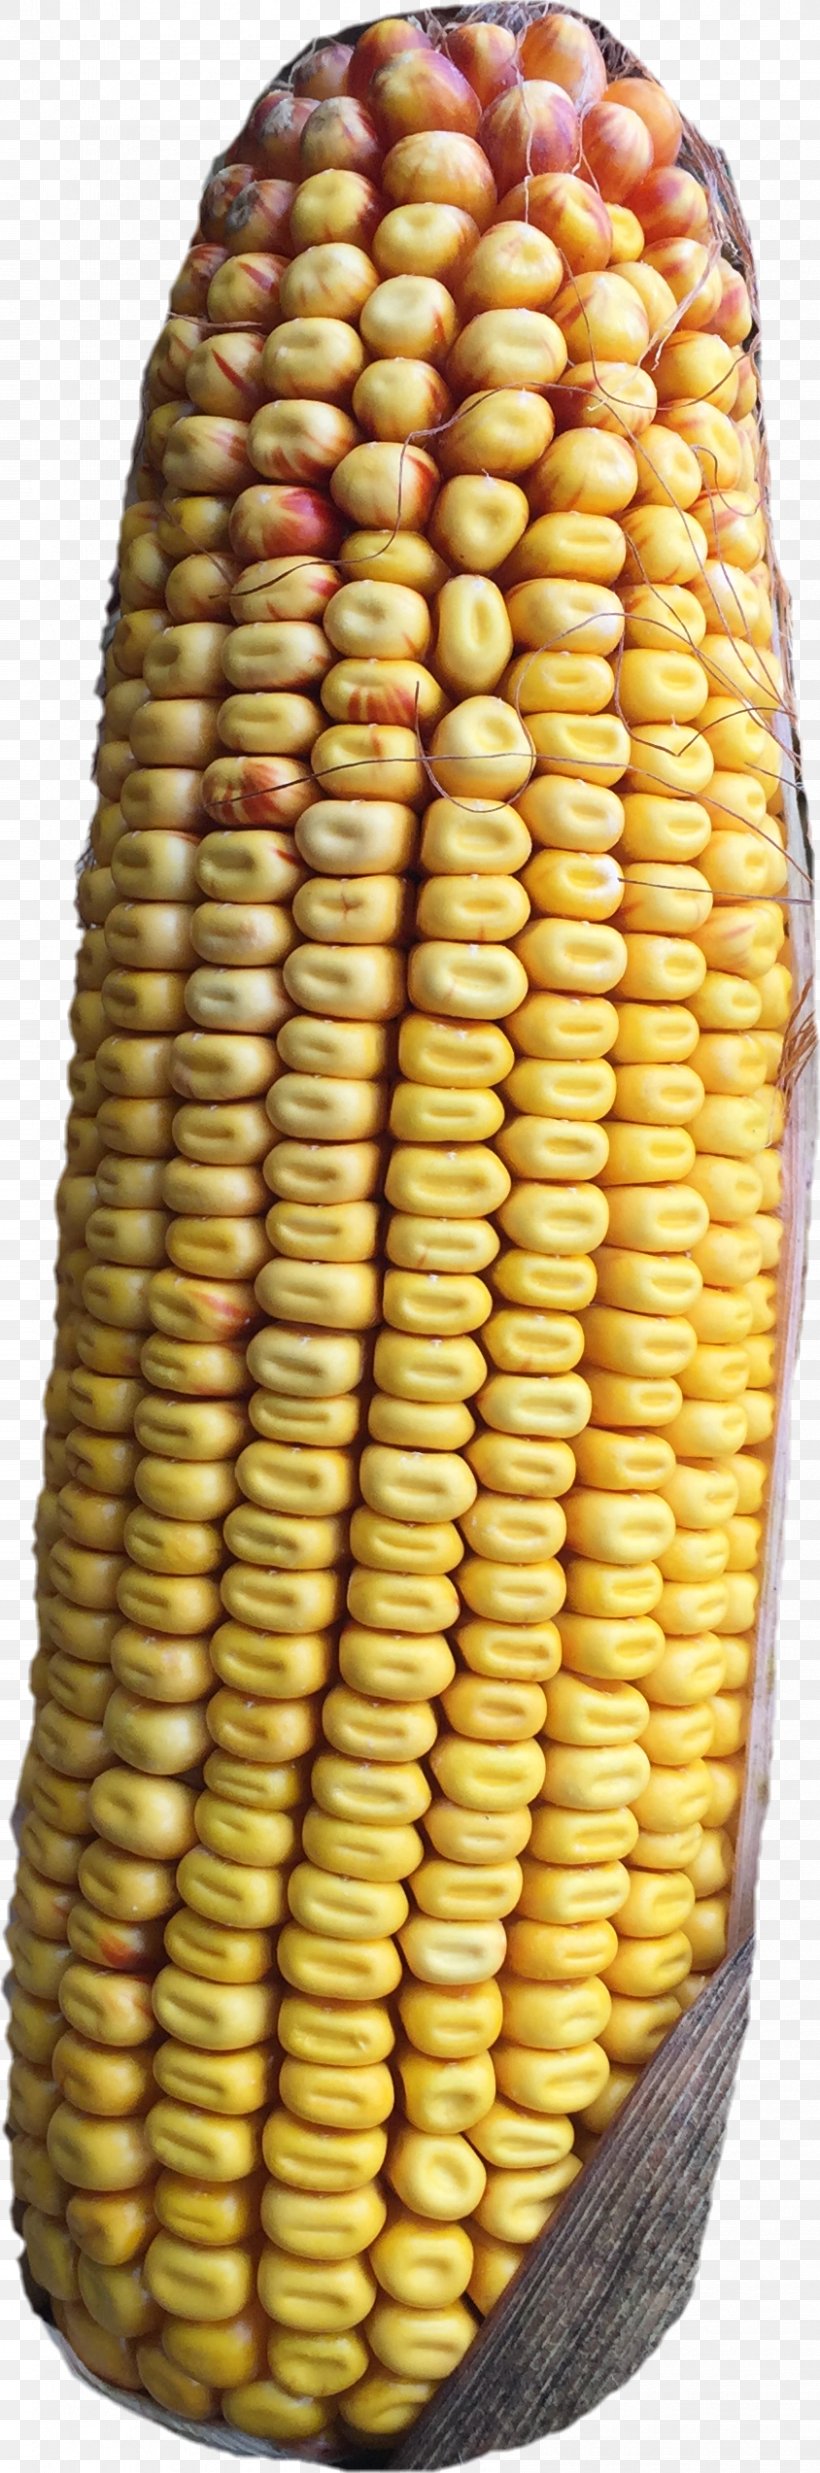 Corn On The Cob Commodity, PNG, 844x2546px, Corn On The Cob, Commodity, Corn, Corn Kernels, Cuisine Download Free